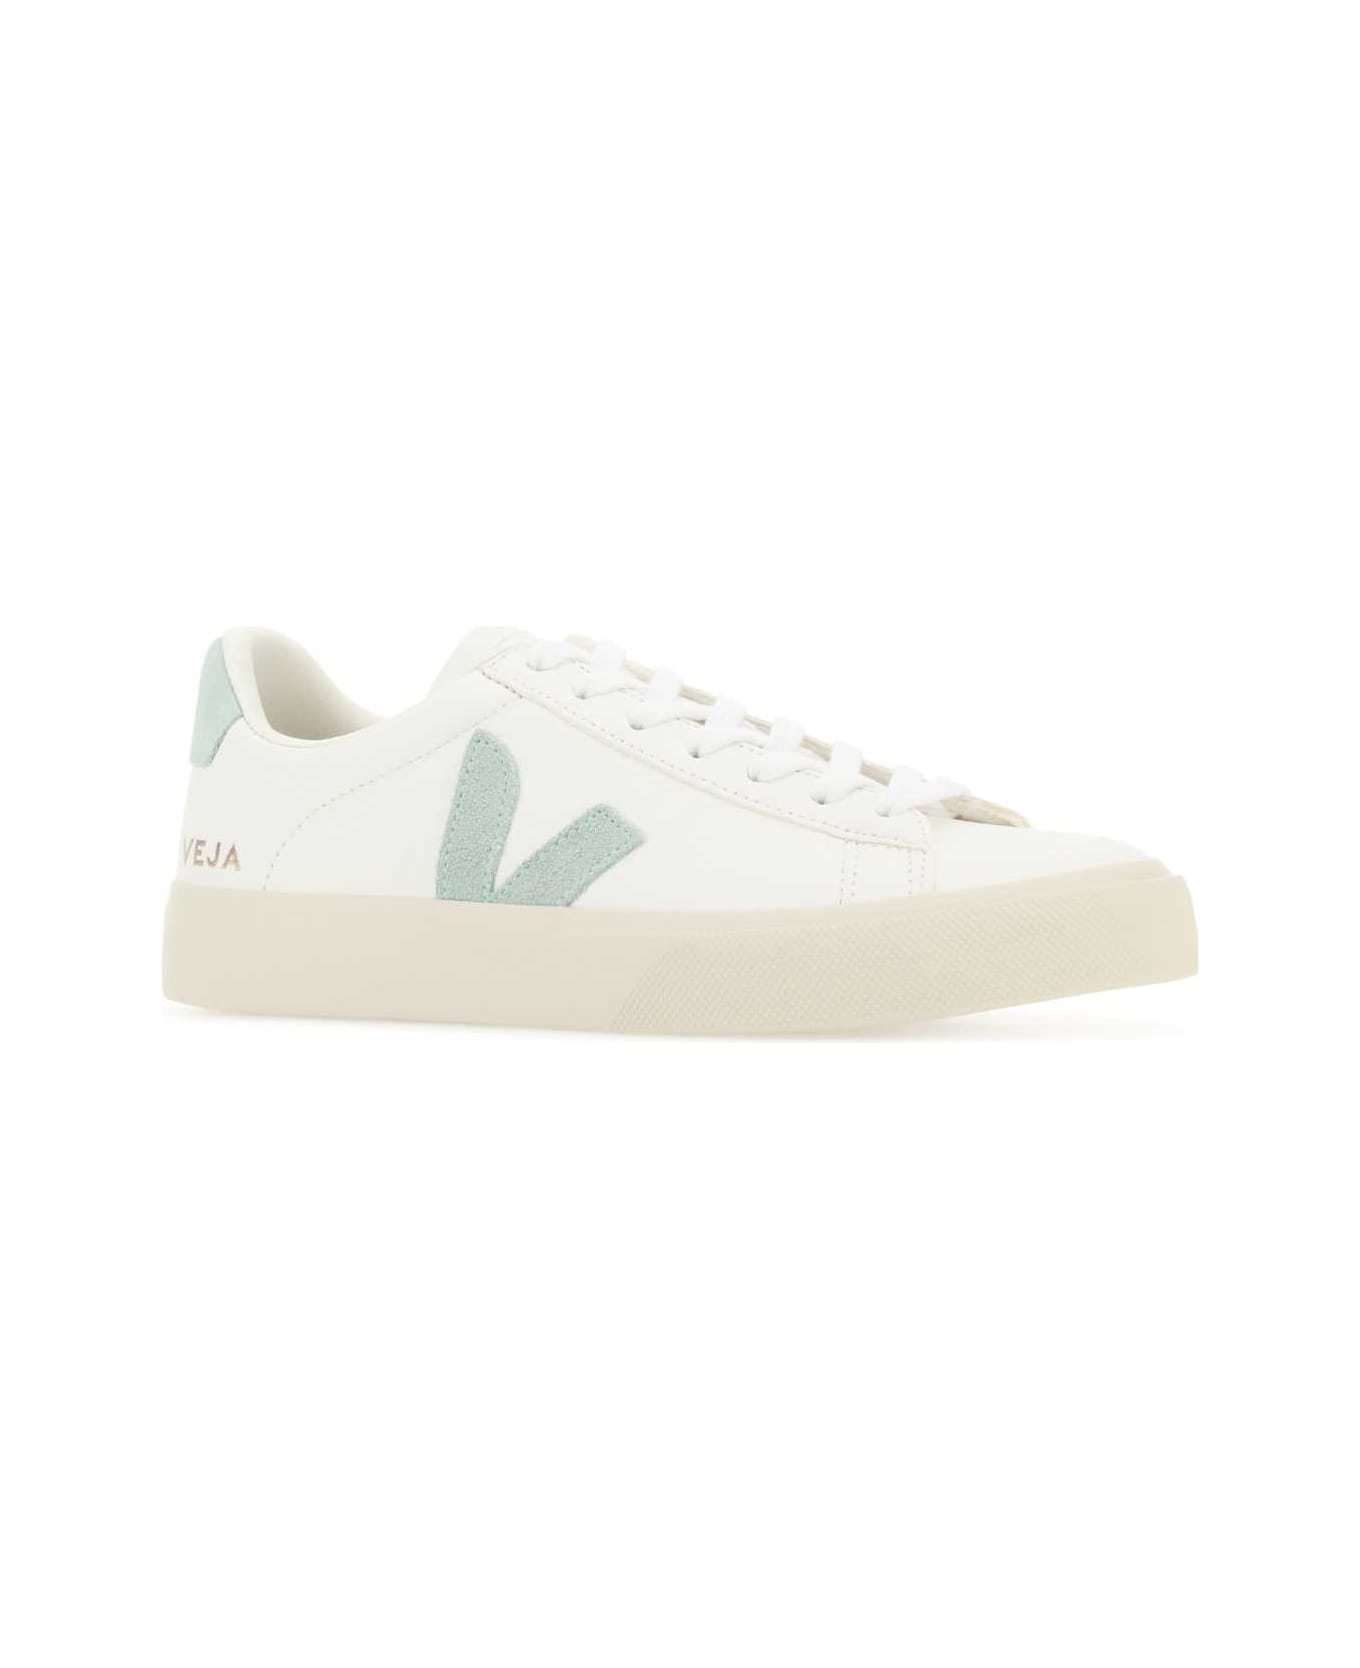 Veja White Chromefree Leather Campo Sneakers - EXTRAWHITEMATCHA スニーカー